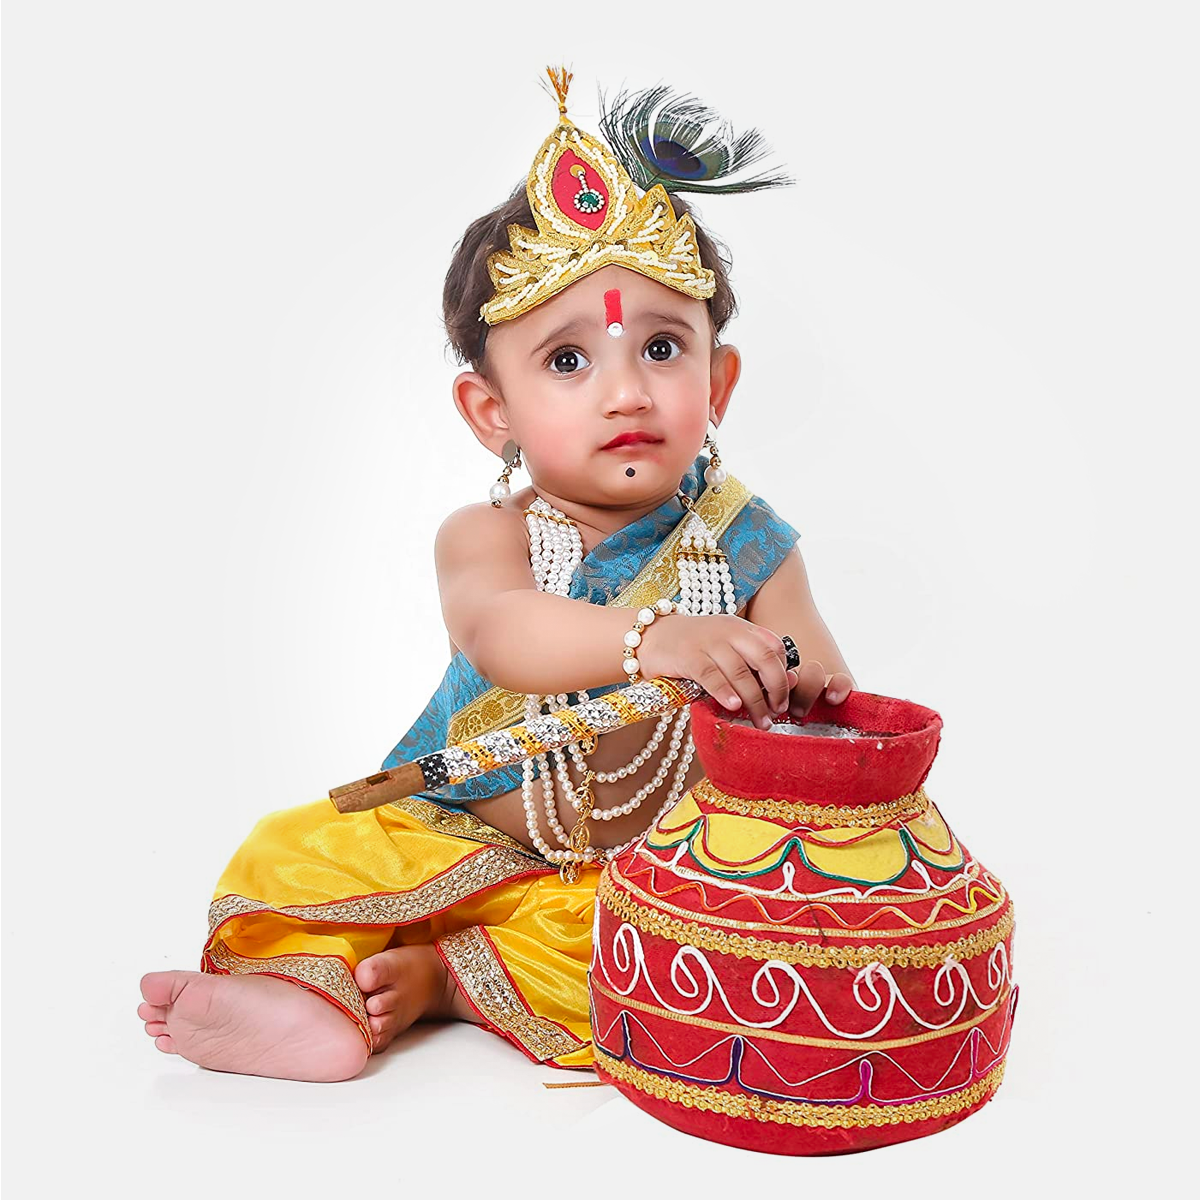 Krishna costume for babies | Baby costumes, Hat ideas, Costumes